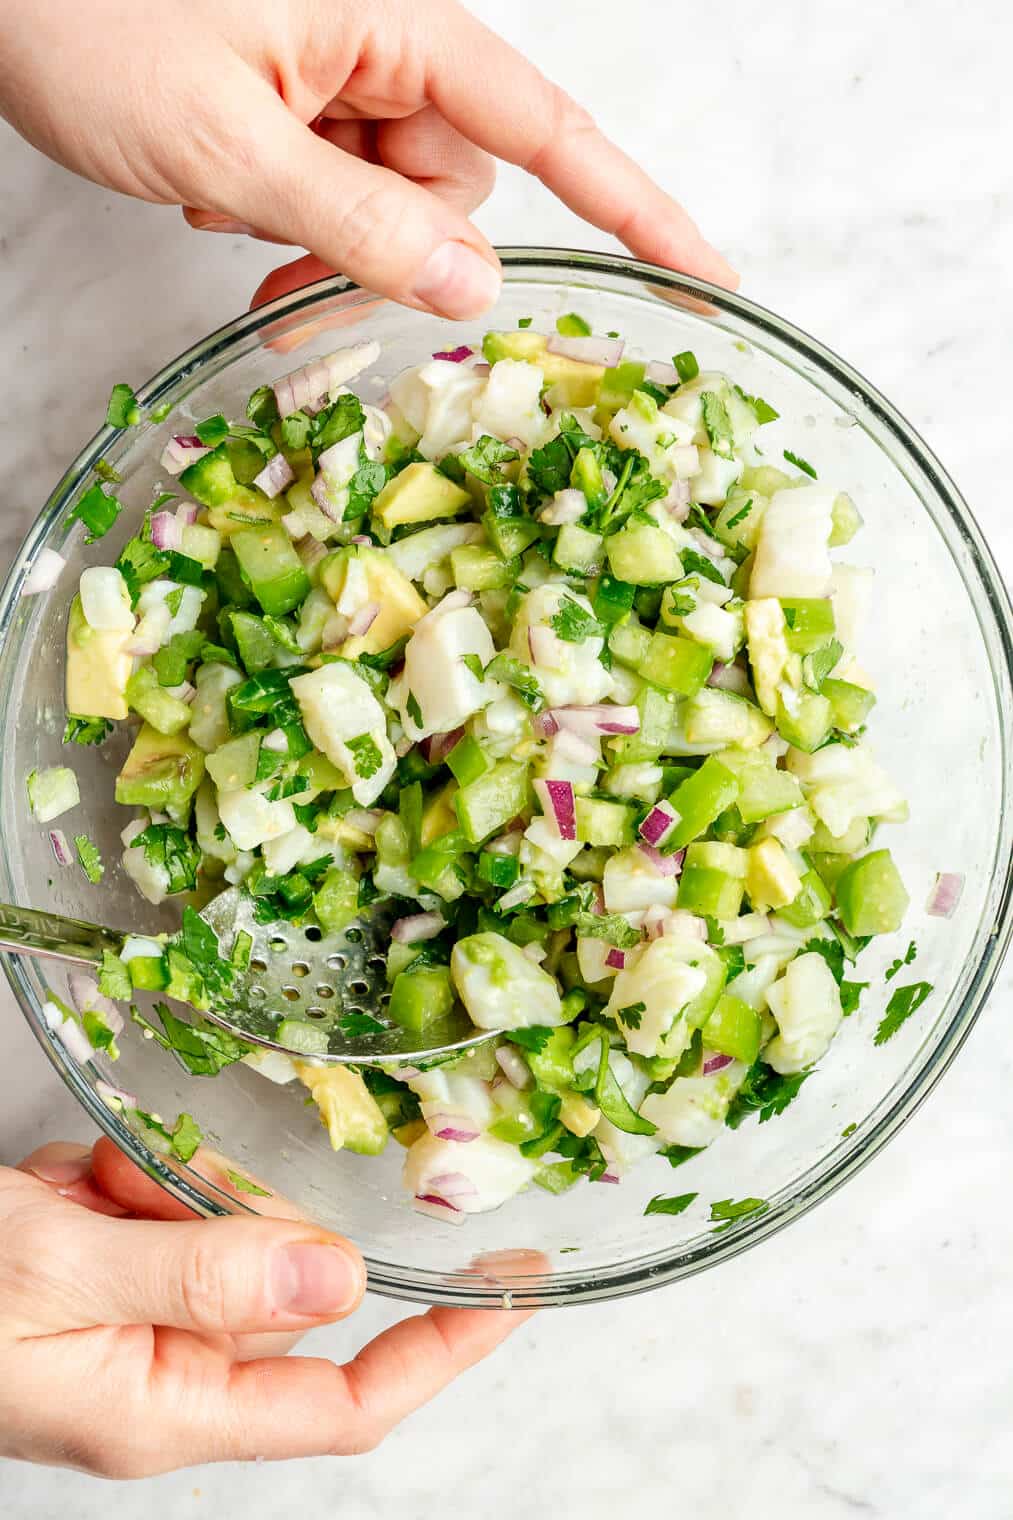 Hands holding a large glass bowl with white fish ceviche mixed with diced tomatillos, avocado, jalapeno, and cilantro.